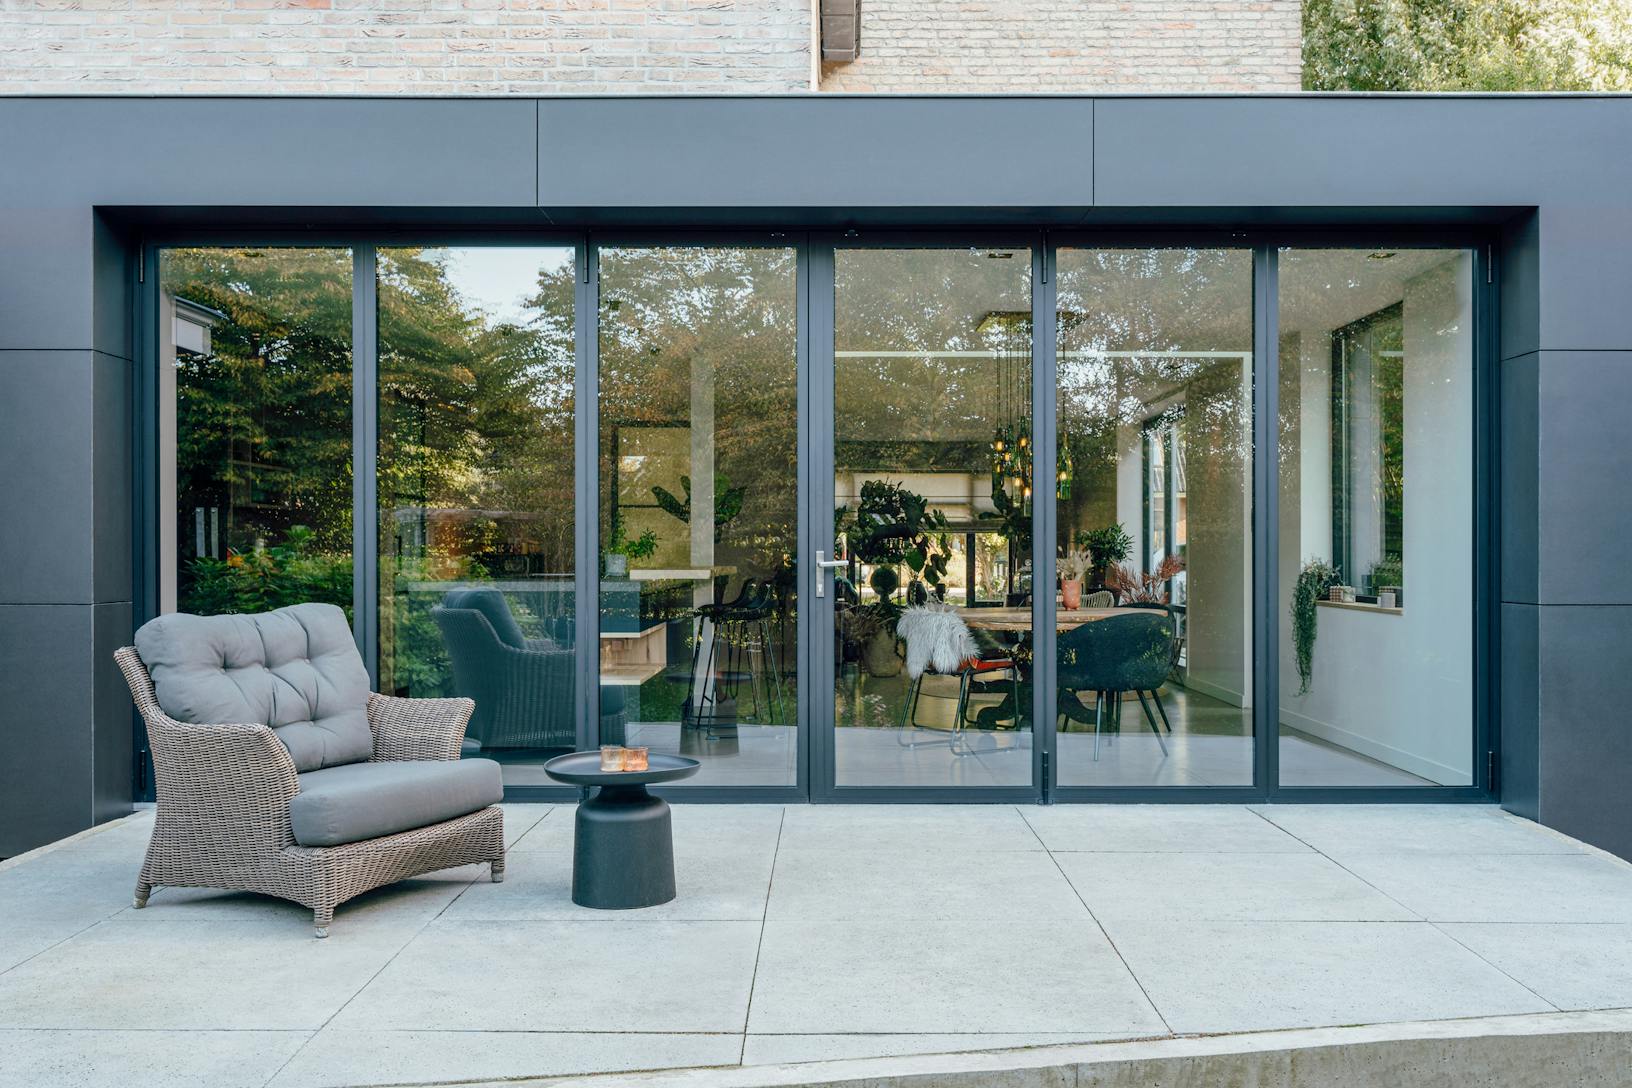 A modern patio with a black chair and table - closed exterior folding doors